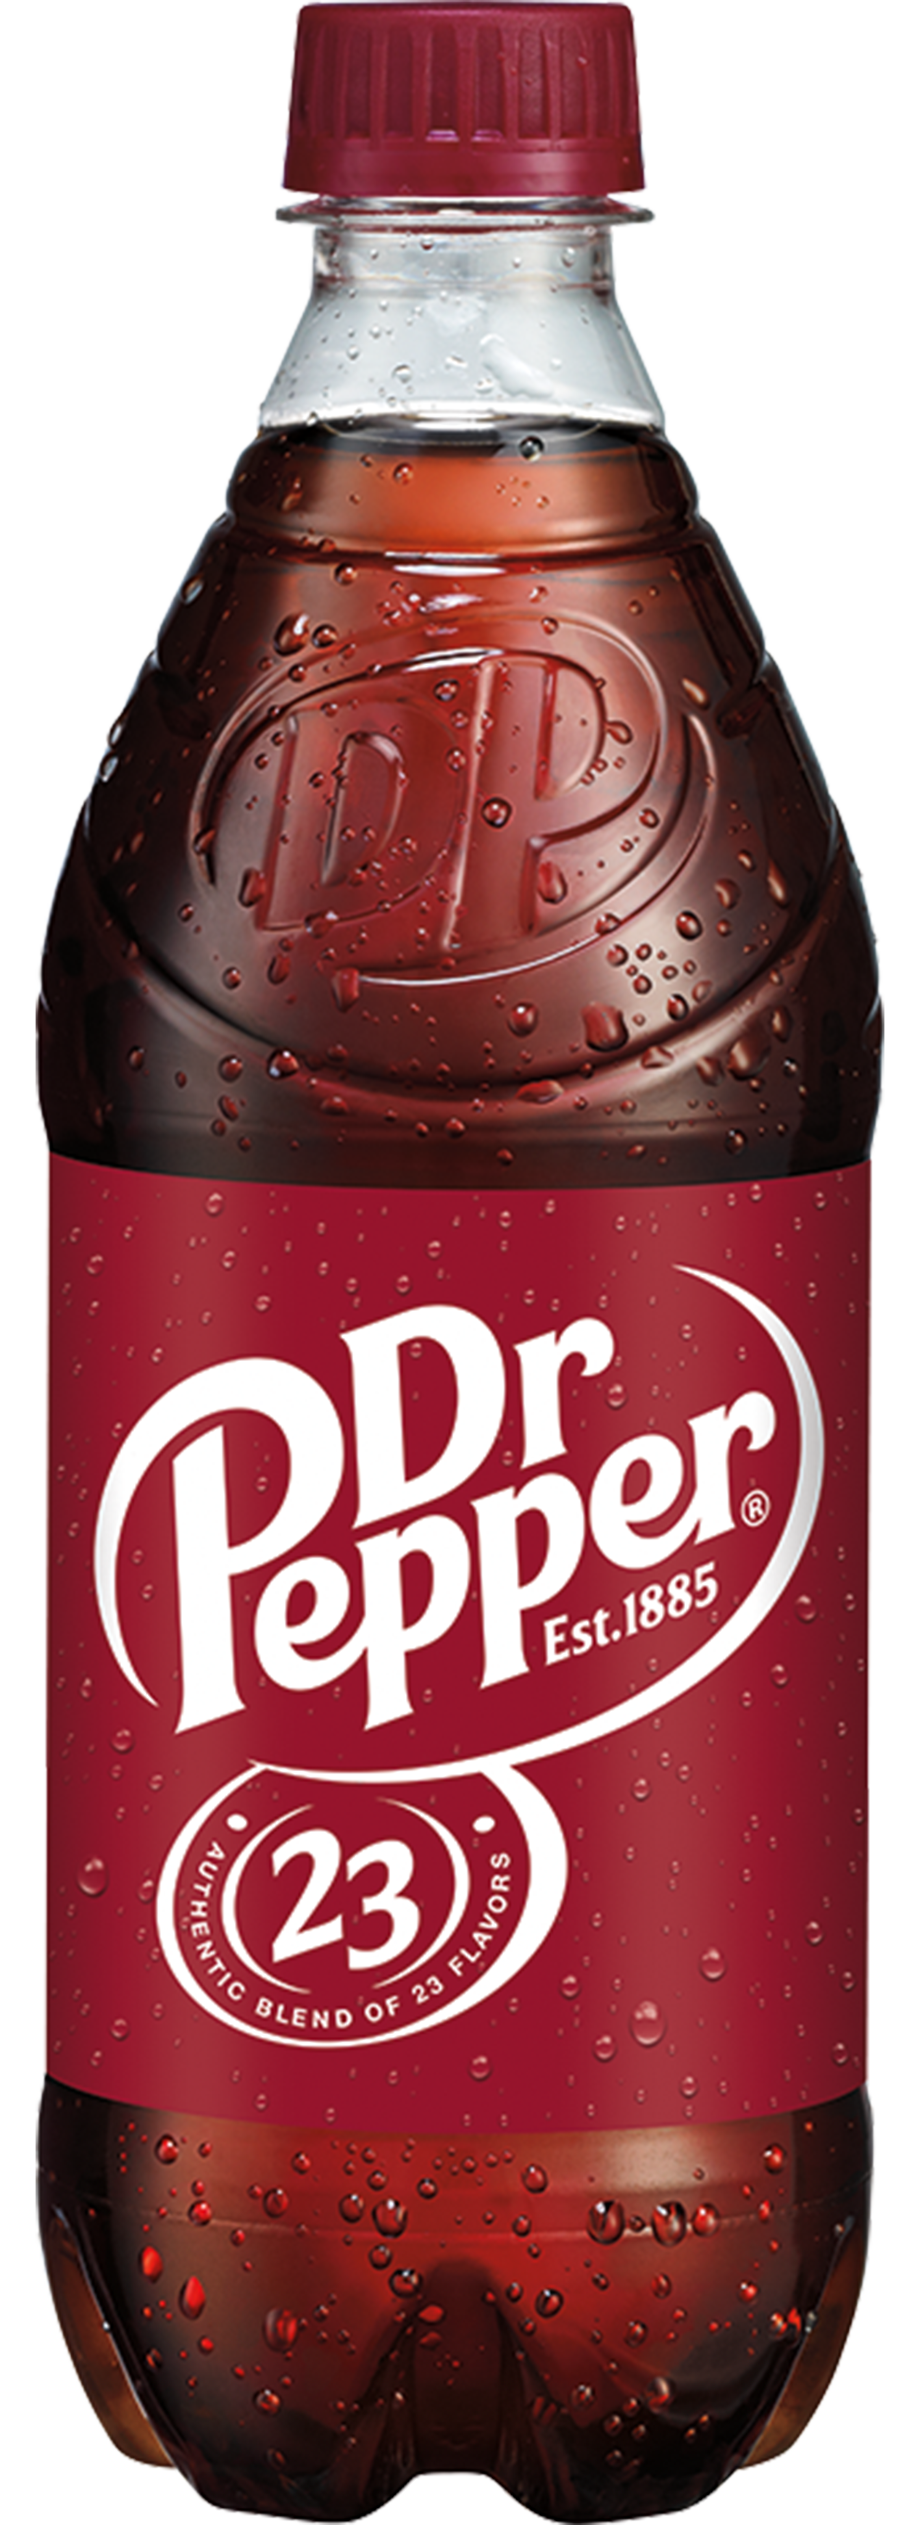 download-high-quality-dr-pepper-logo-small-transparent-png-images-art